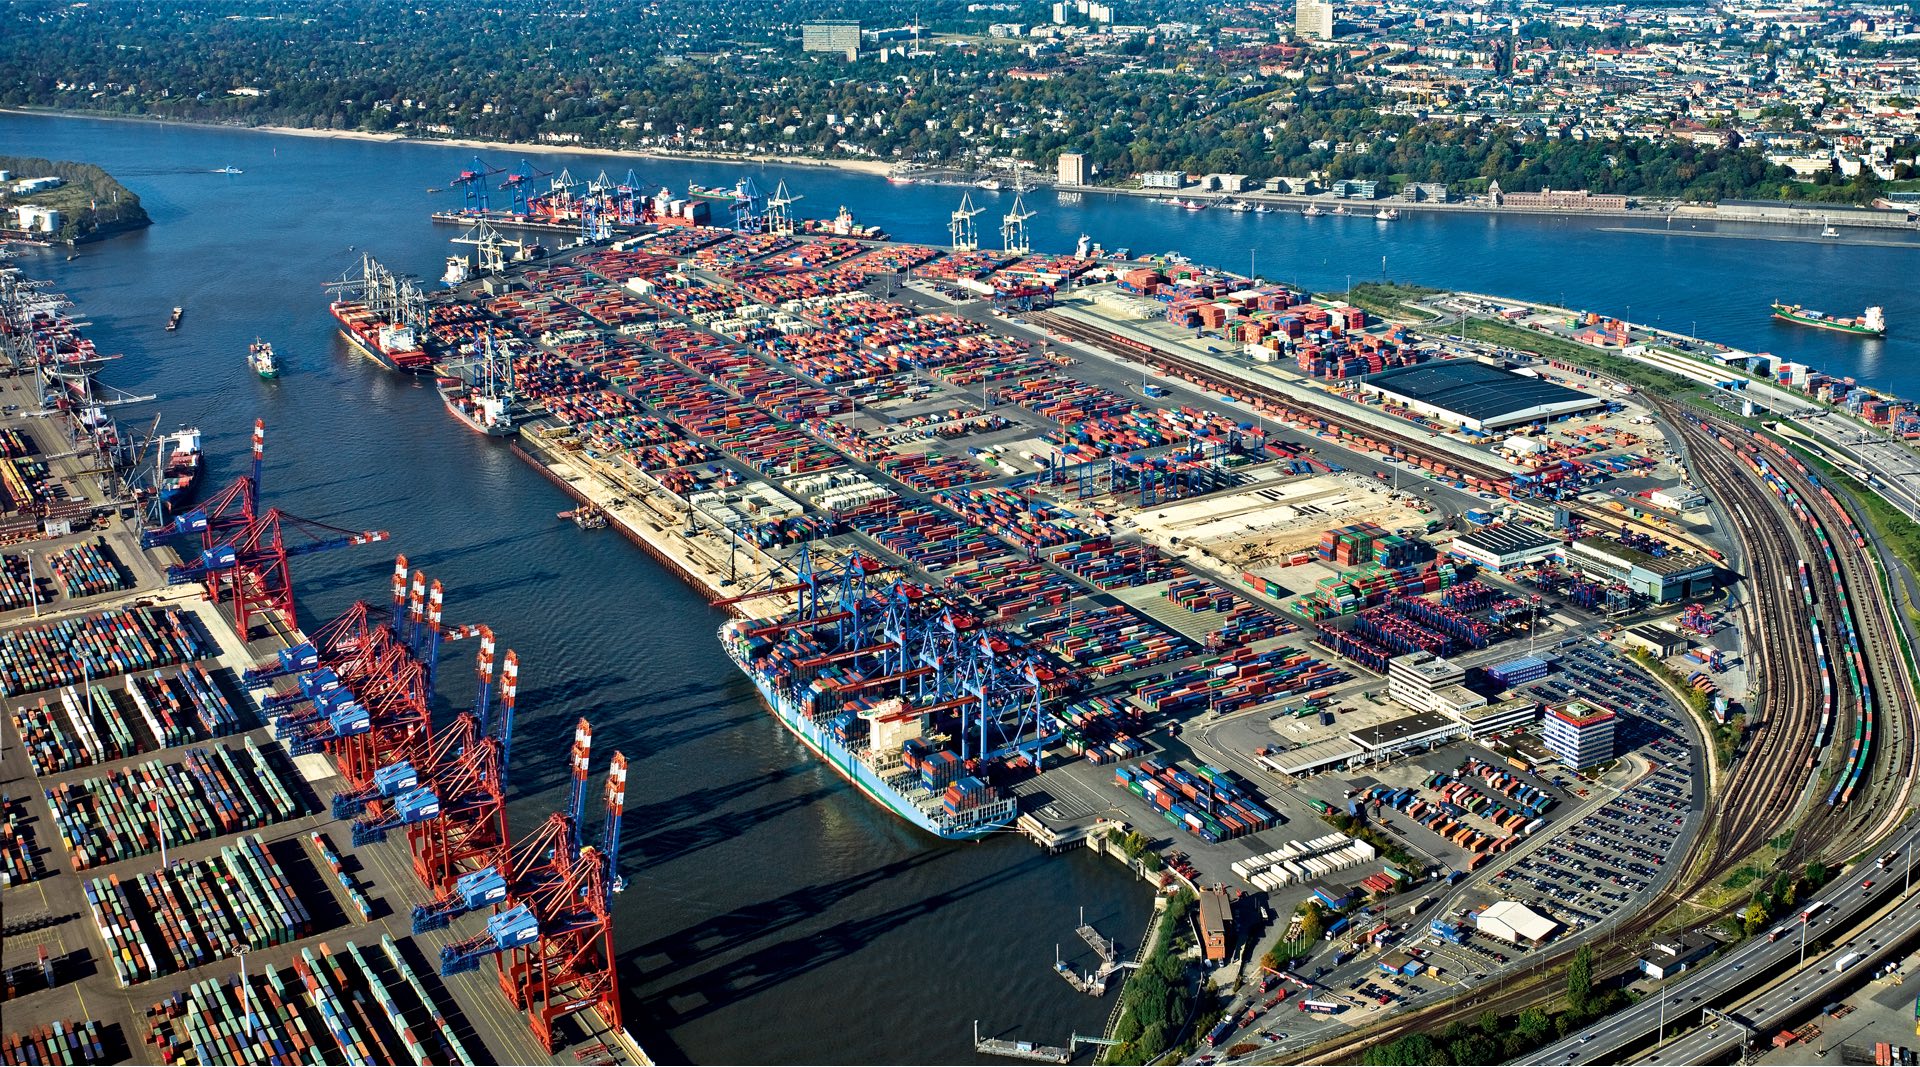 CTB is the largest container handling facility at the Port of Hamburg. 